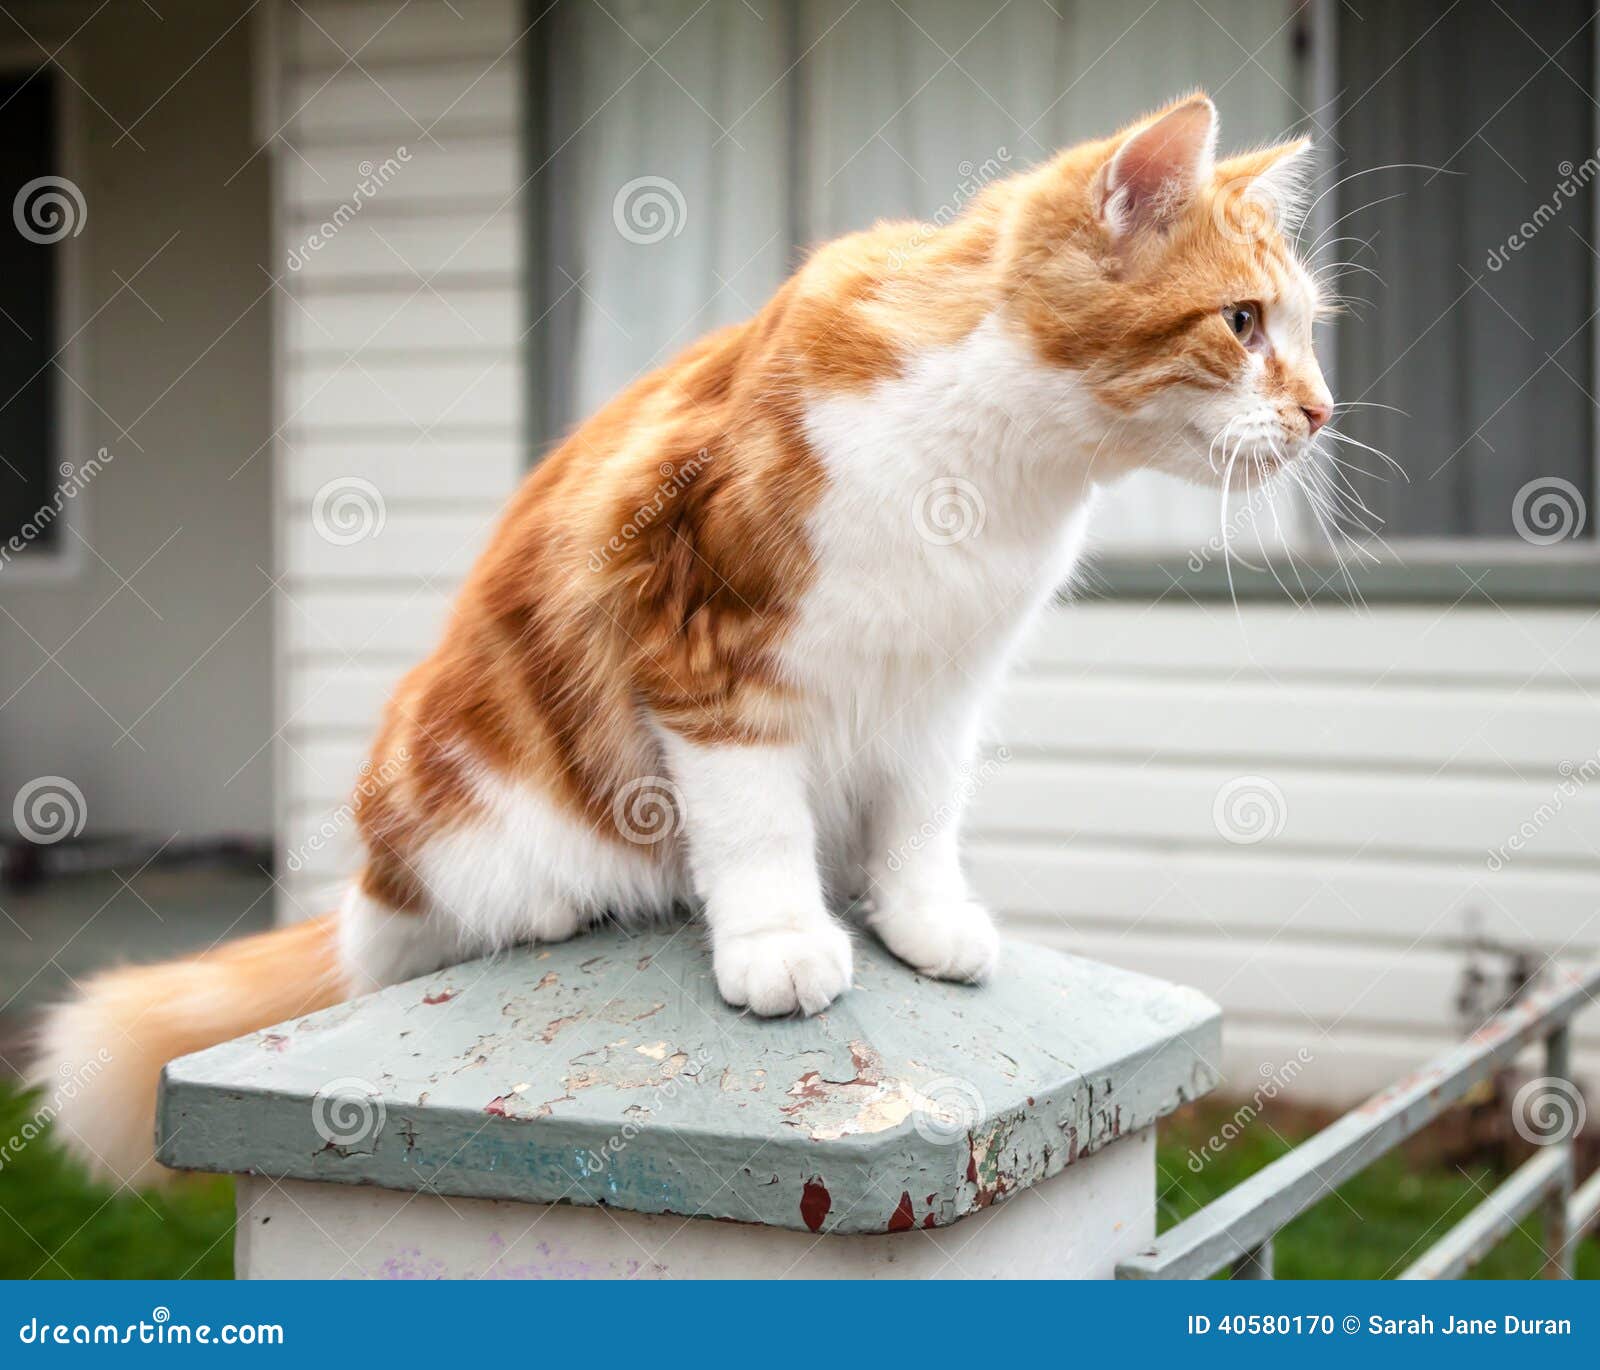 ginger and white tabby cat